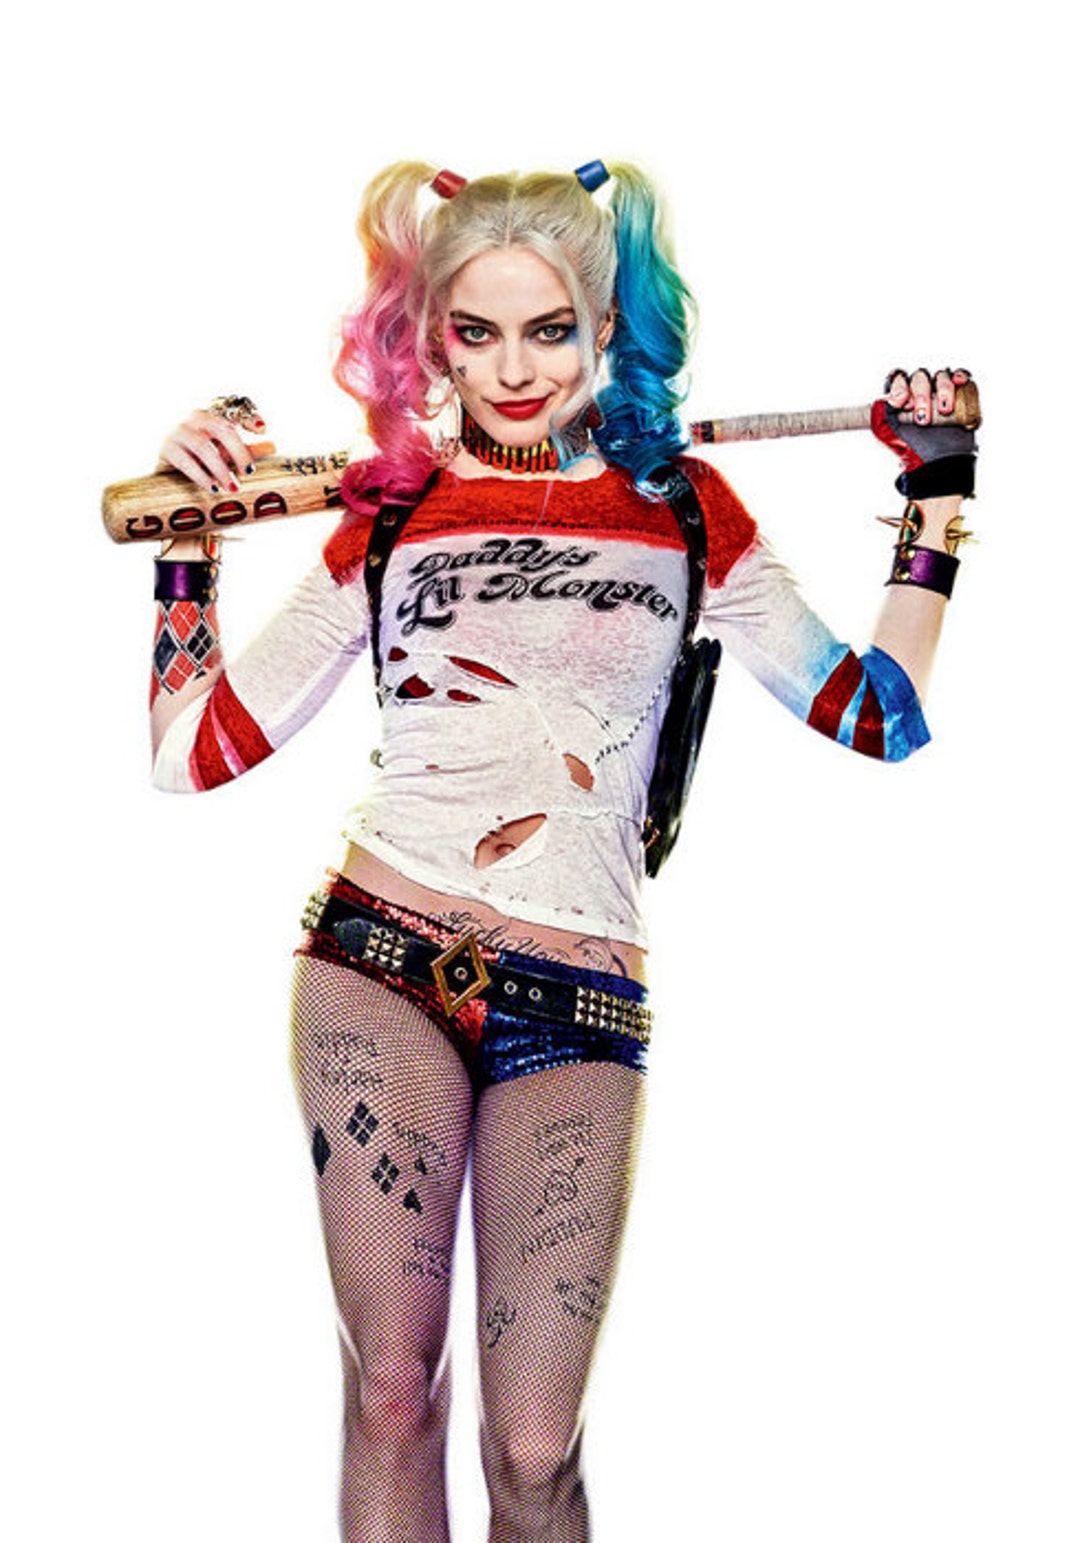 Pin by Go to Harley Quinn with Joker on Harley Quinn Loves Joker  Harley  quinn costume, Harley quinn halloween costume, Harley quinn cosplay